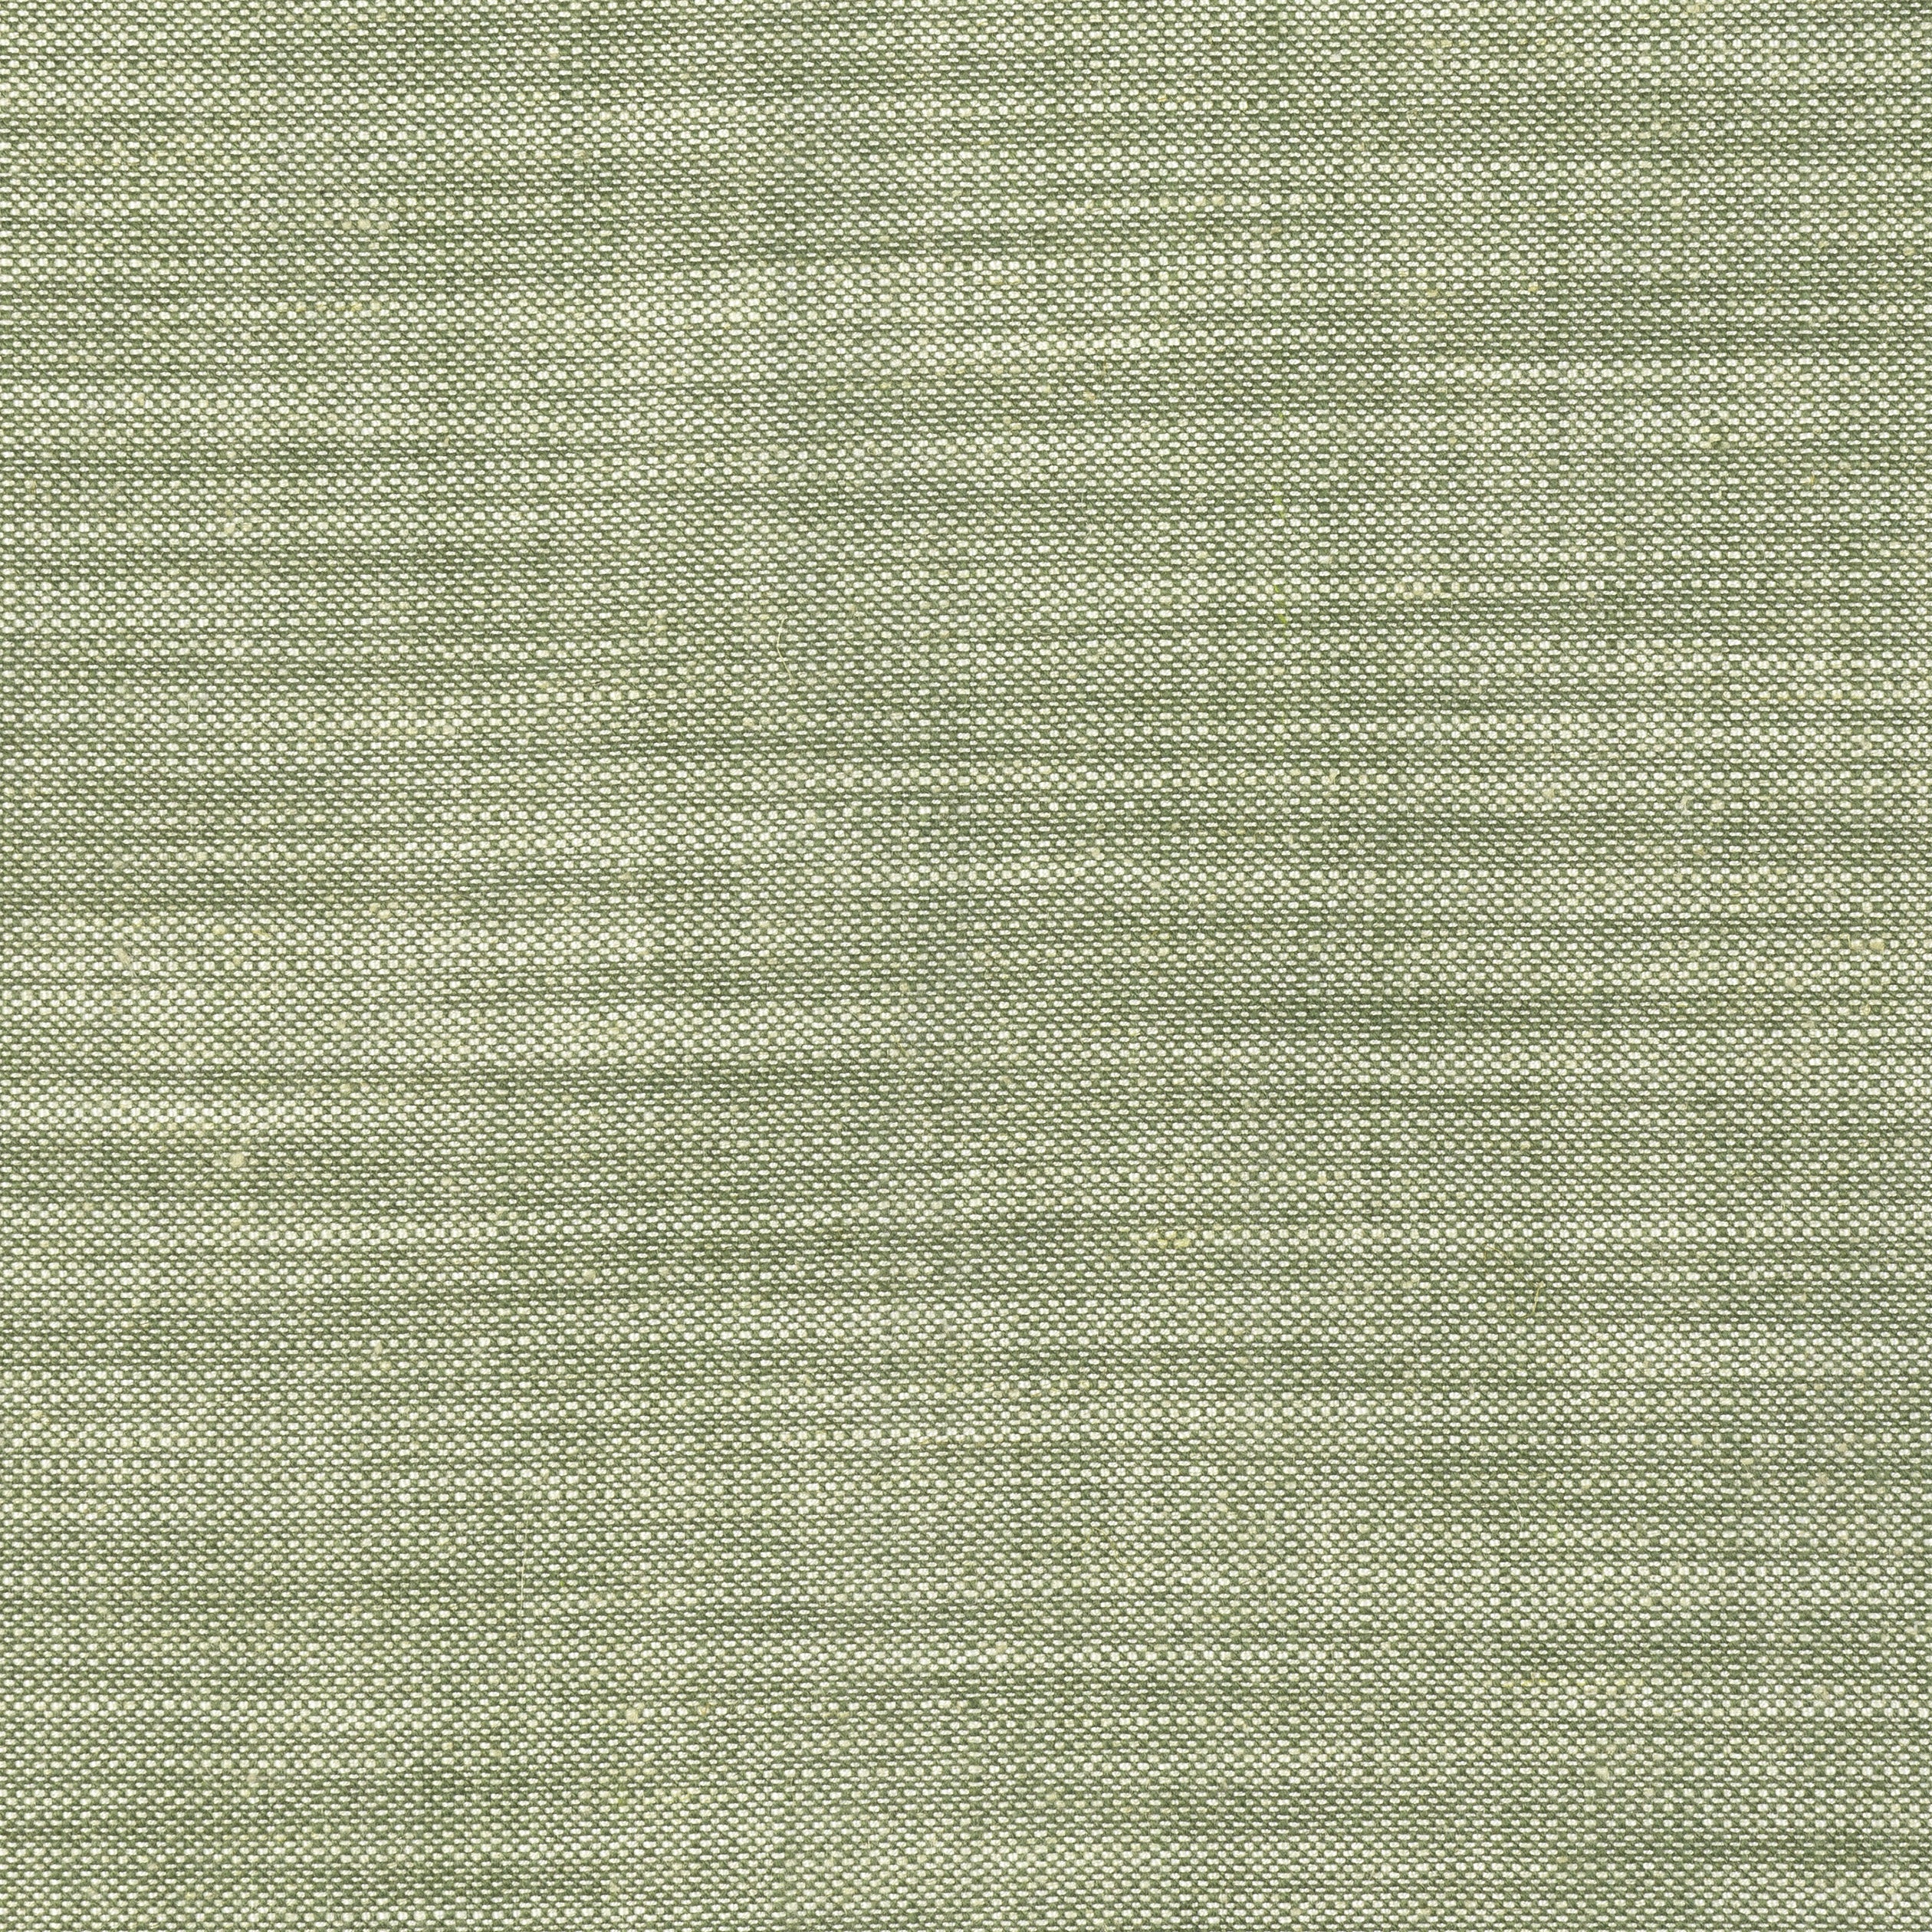 Terra Linen fabric in olive color - pattern number FWW7690 - by Thibaut in the Palisades collection